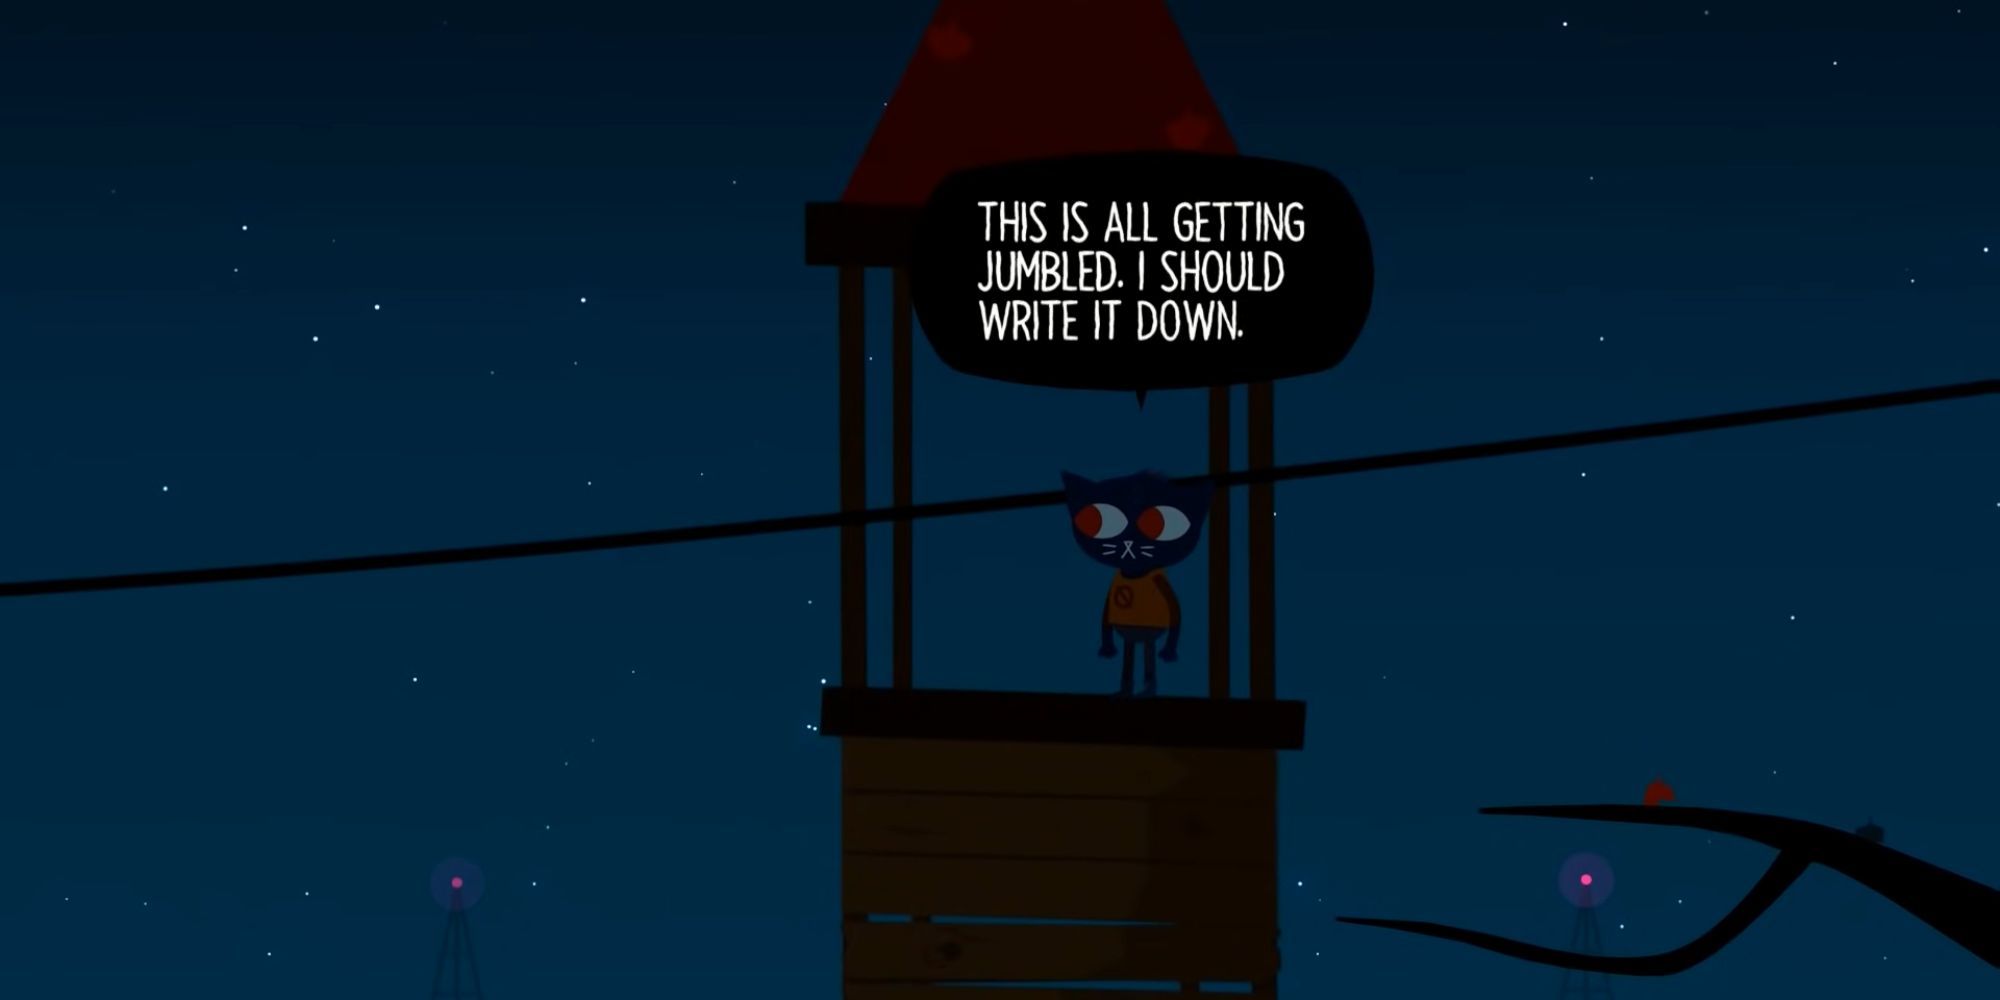 Mae stands atop a tower by a power line at night